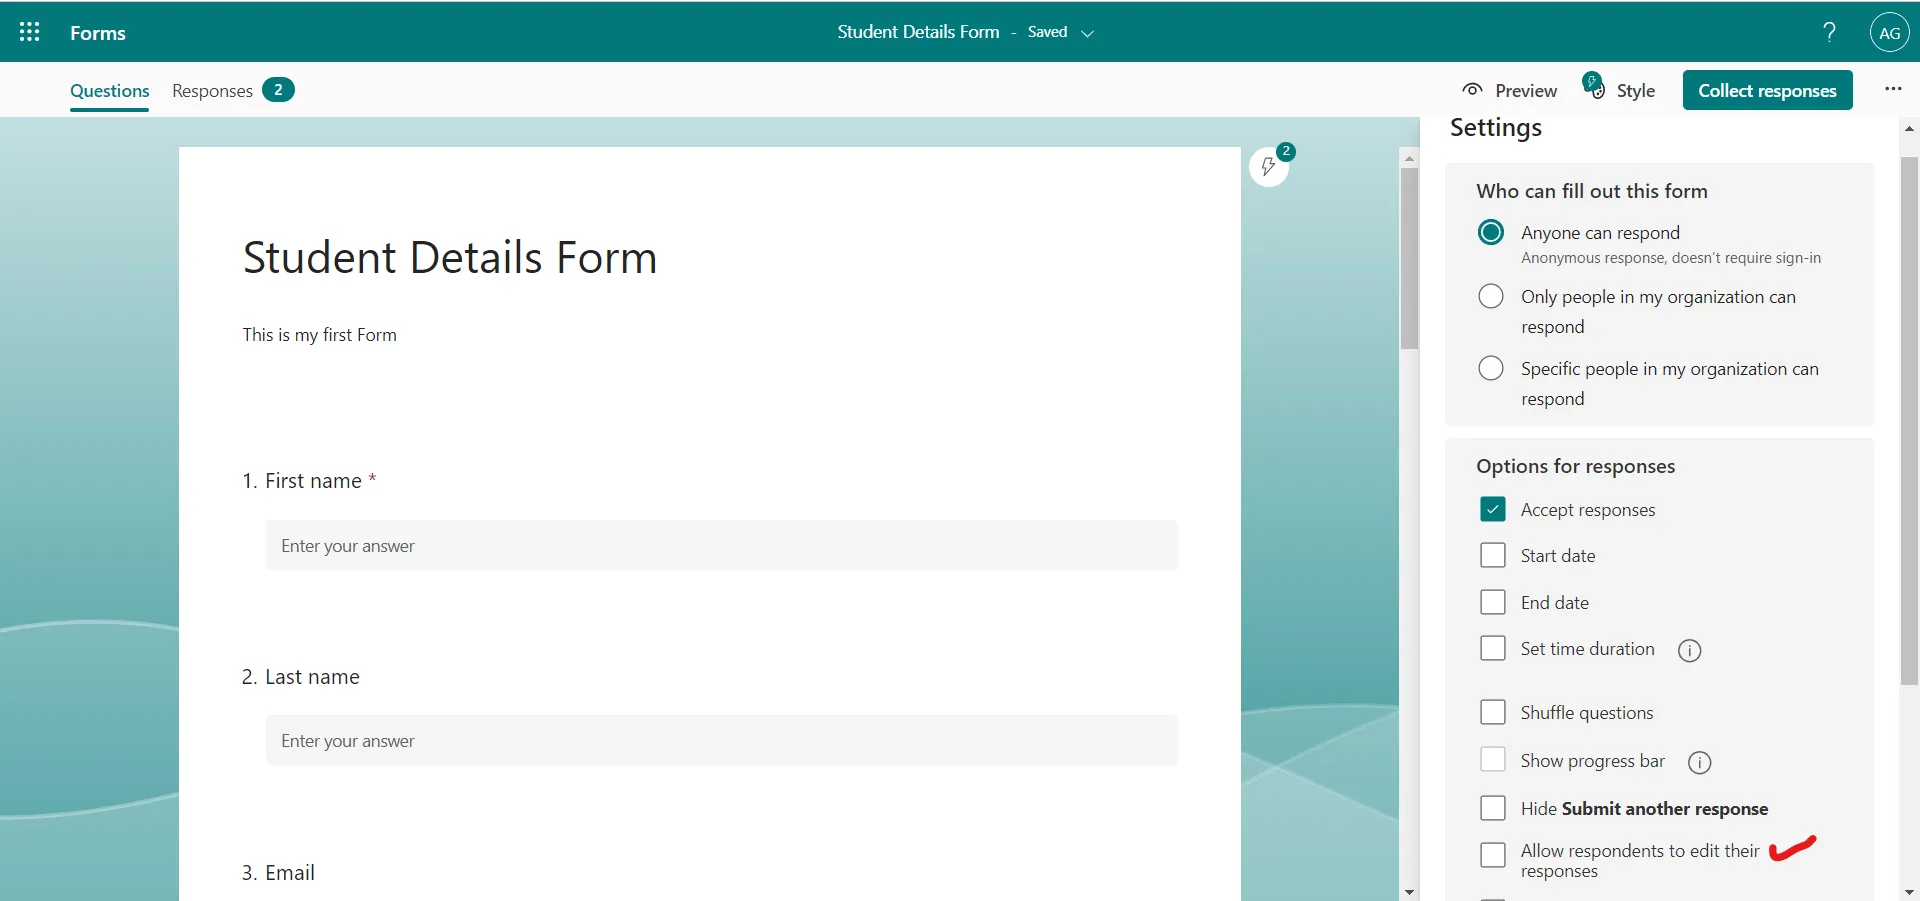 Settings in the Microsoft Forms